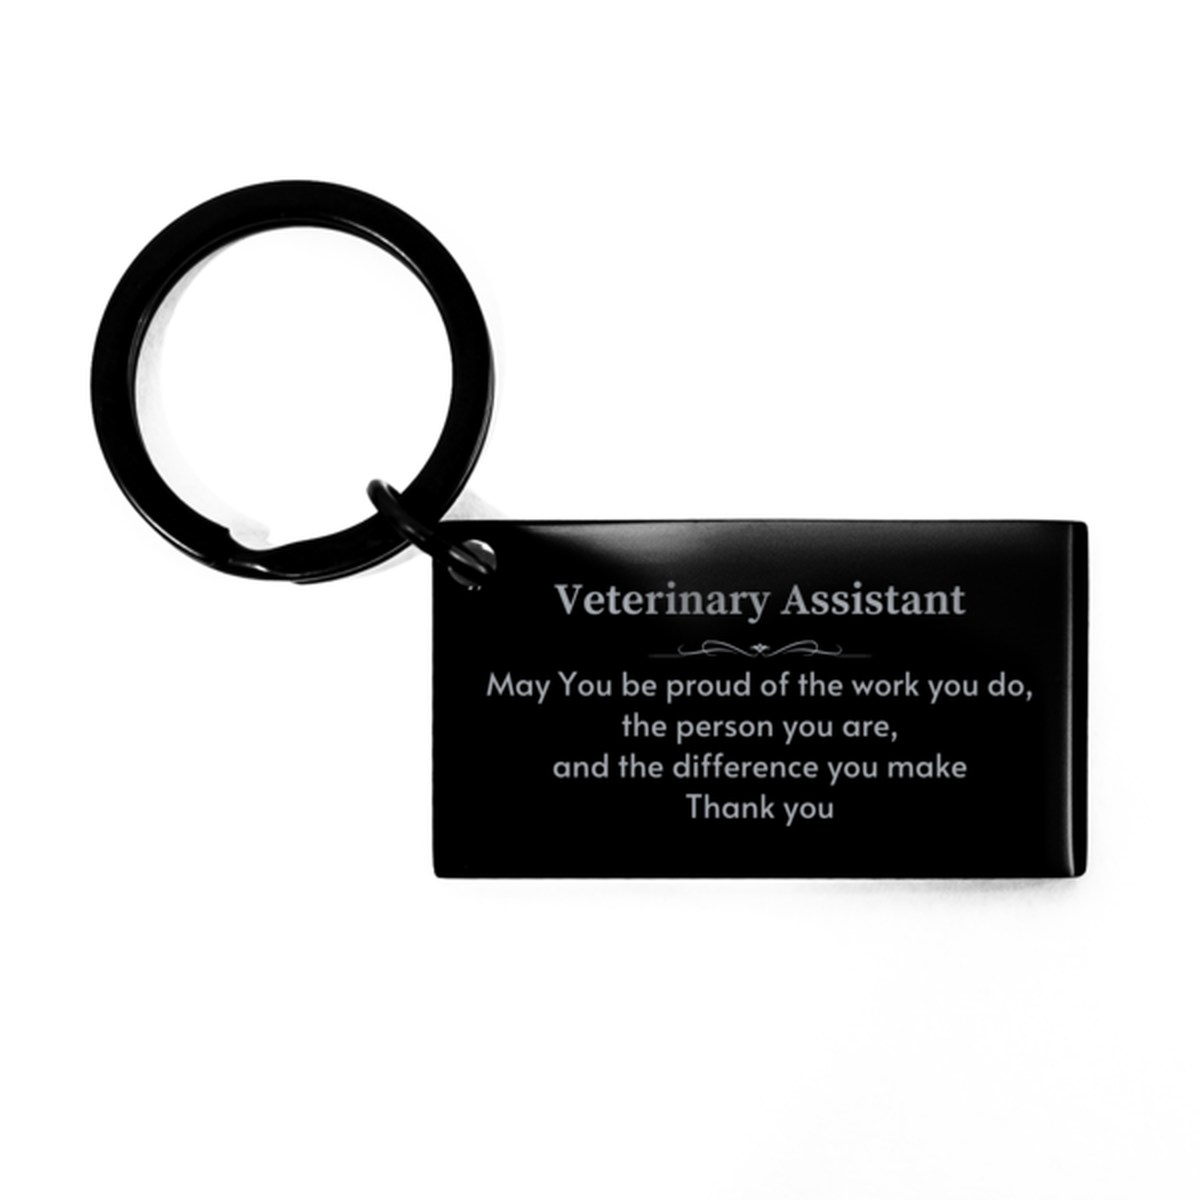 Heartwarming Keychain Retirement Coworkers Gifts for Veterinary Assistant, Aircraft Mechanic May You be proud of the work you do, the person you are Gifts for Boss Men Women Friends